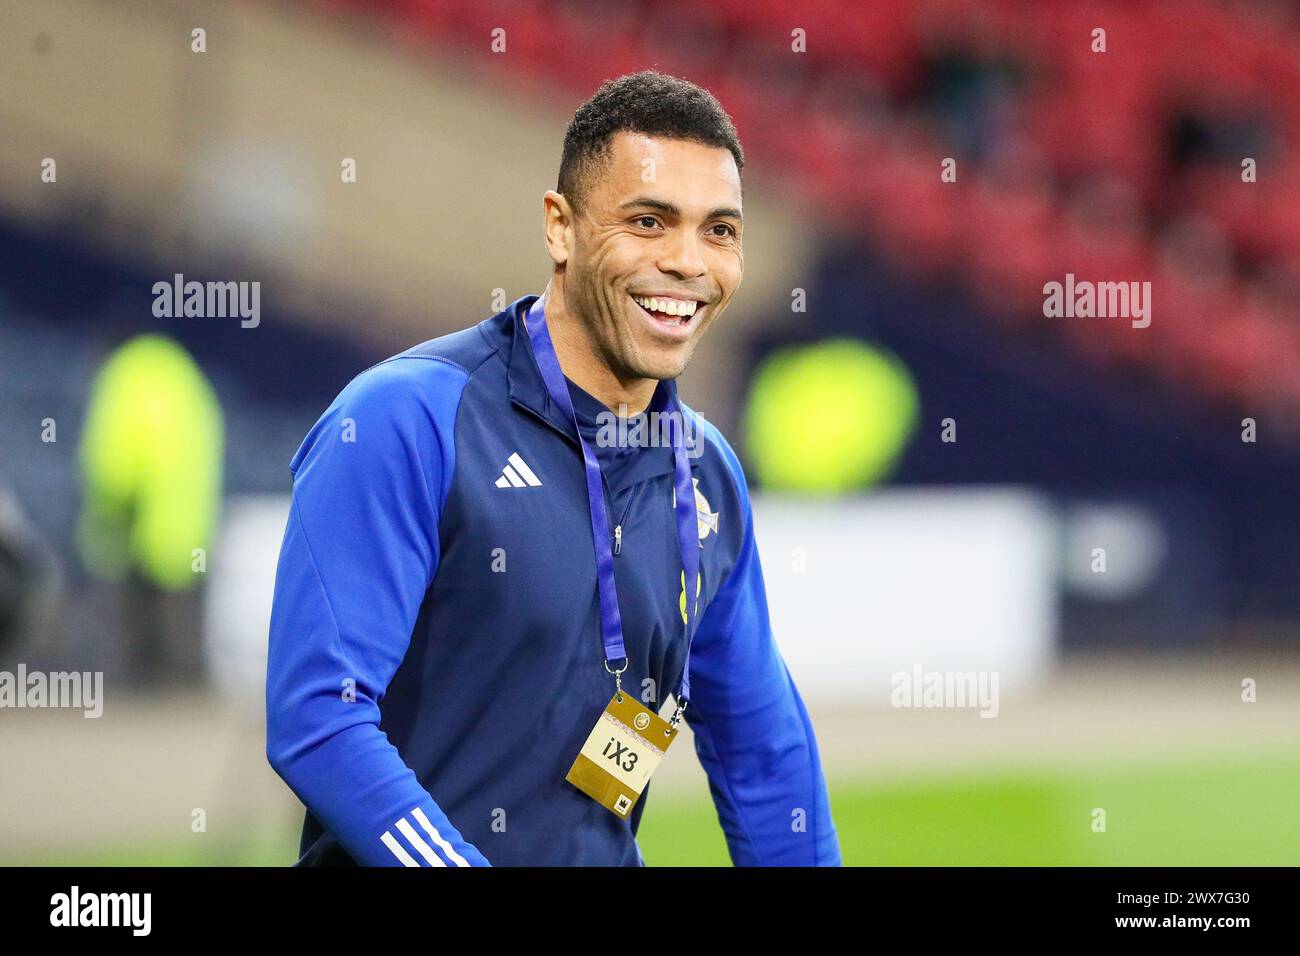 JOSH MAGENNIS, professional football player, playing for the Northern Ireland National team. Image taken during a training and warm up session. Stock Photo